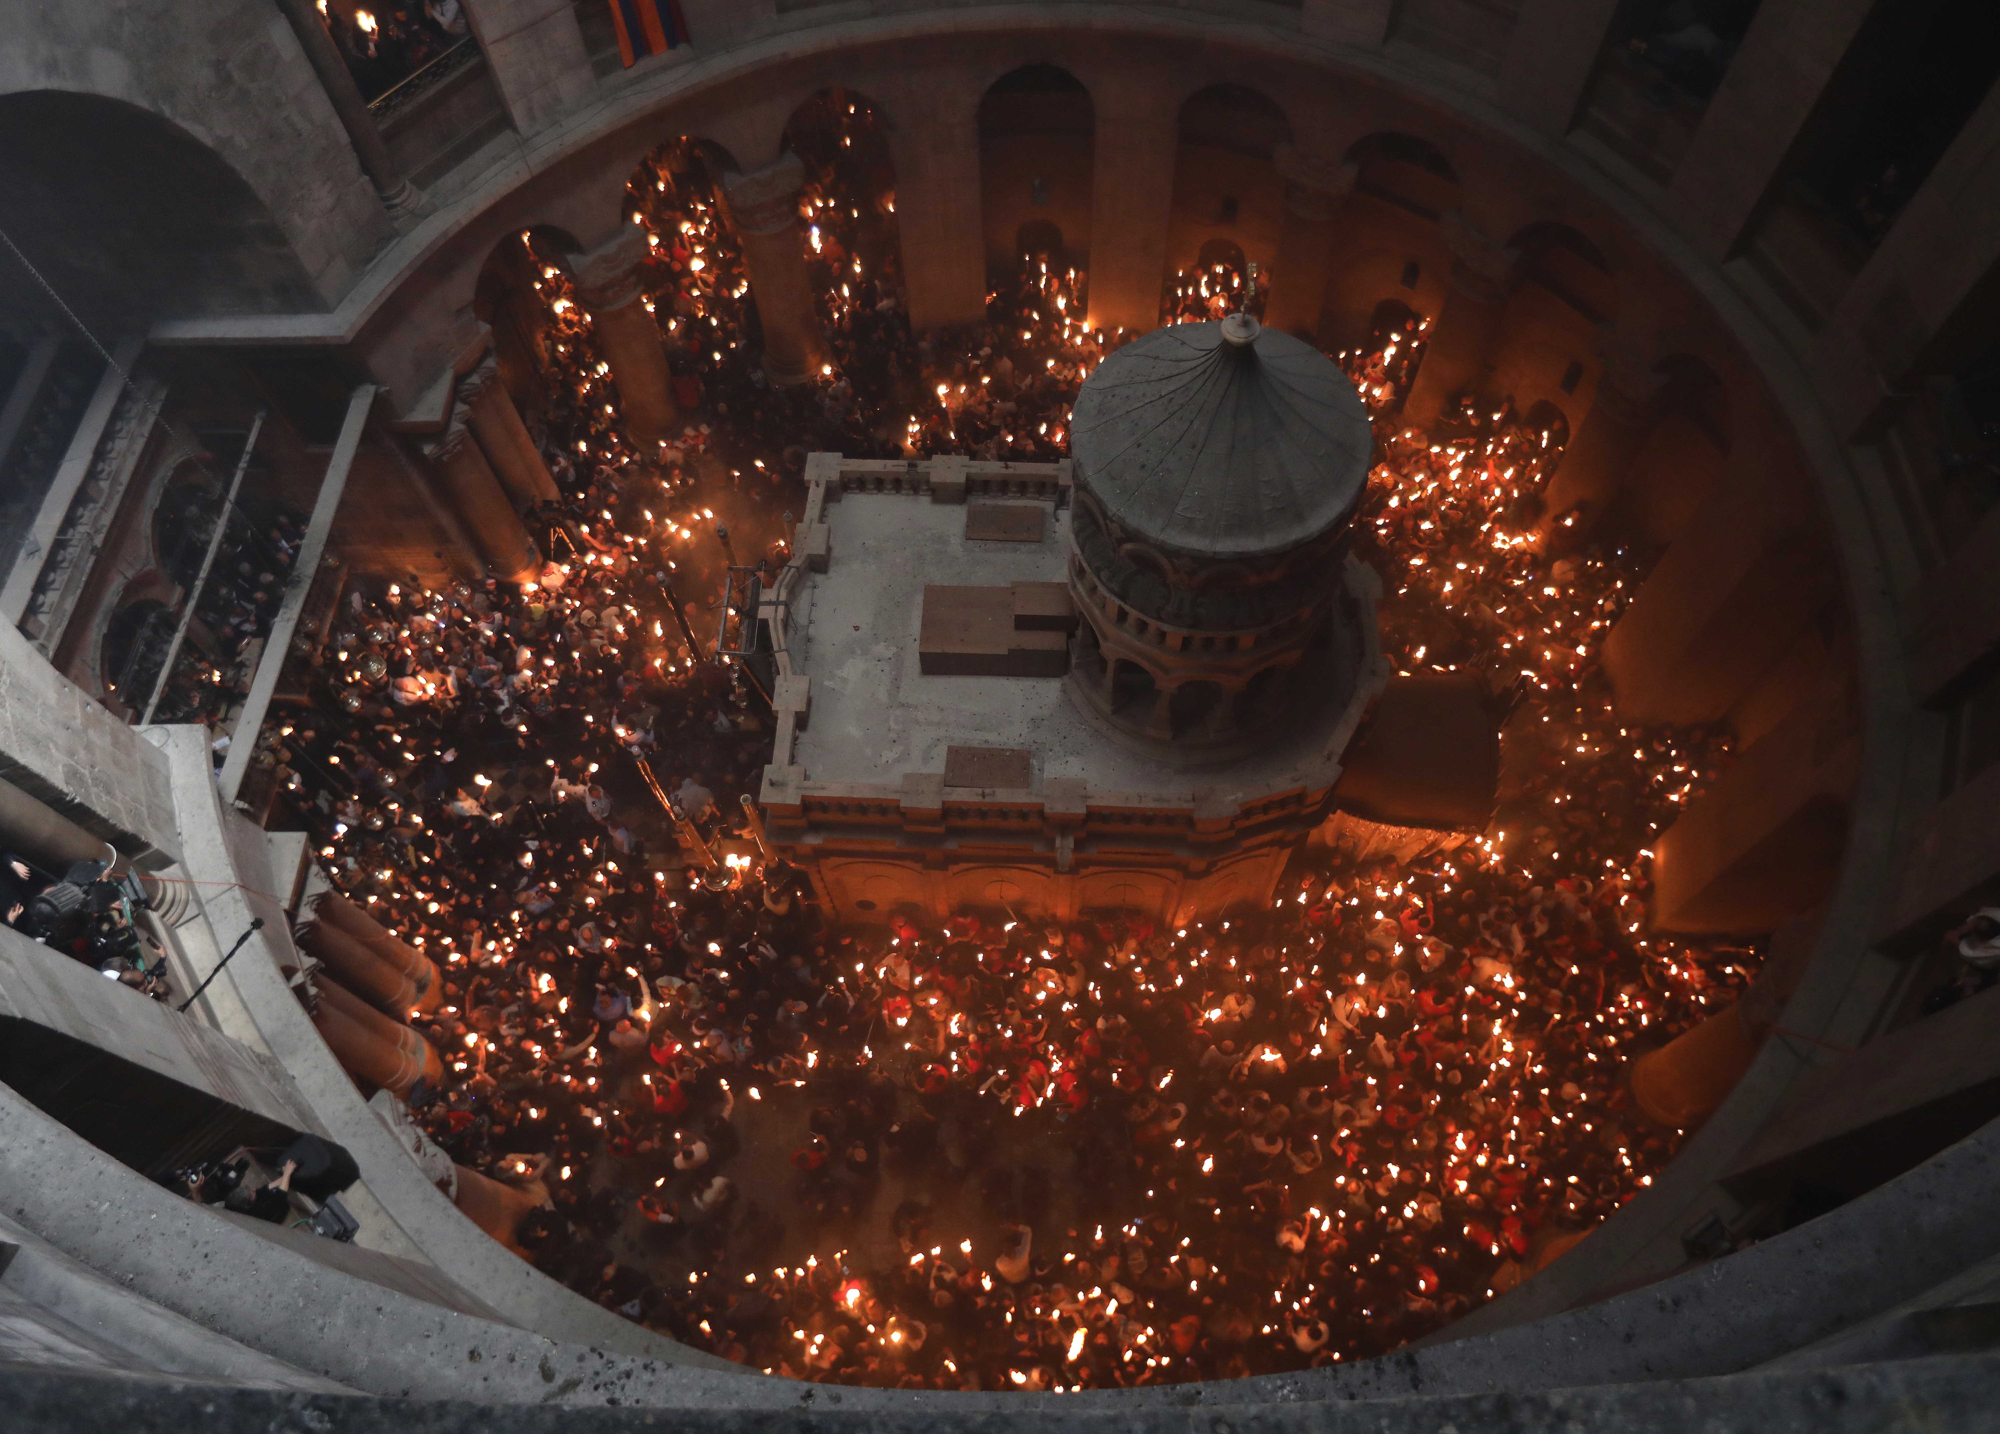 Church of Holy Sepulchre reopens after Netanyahu steps in